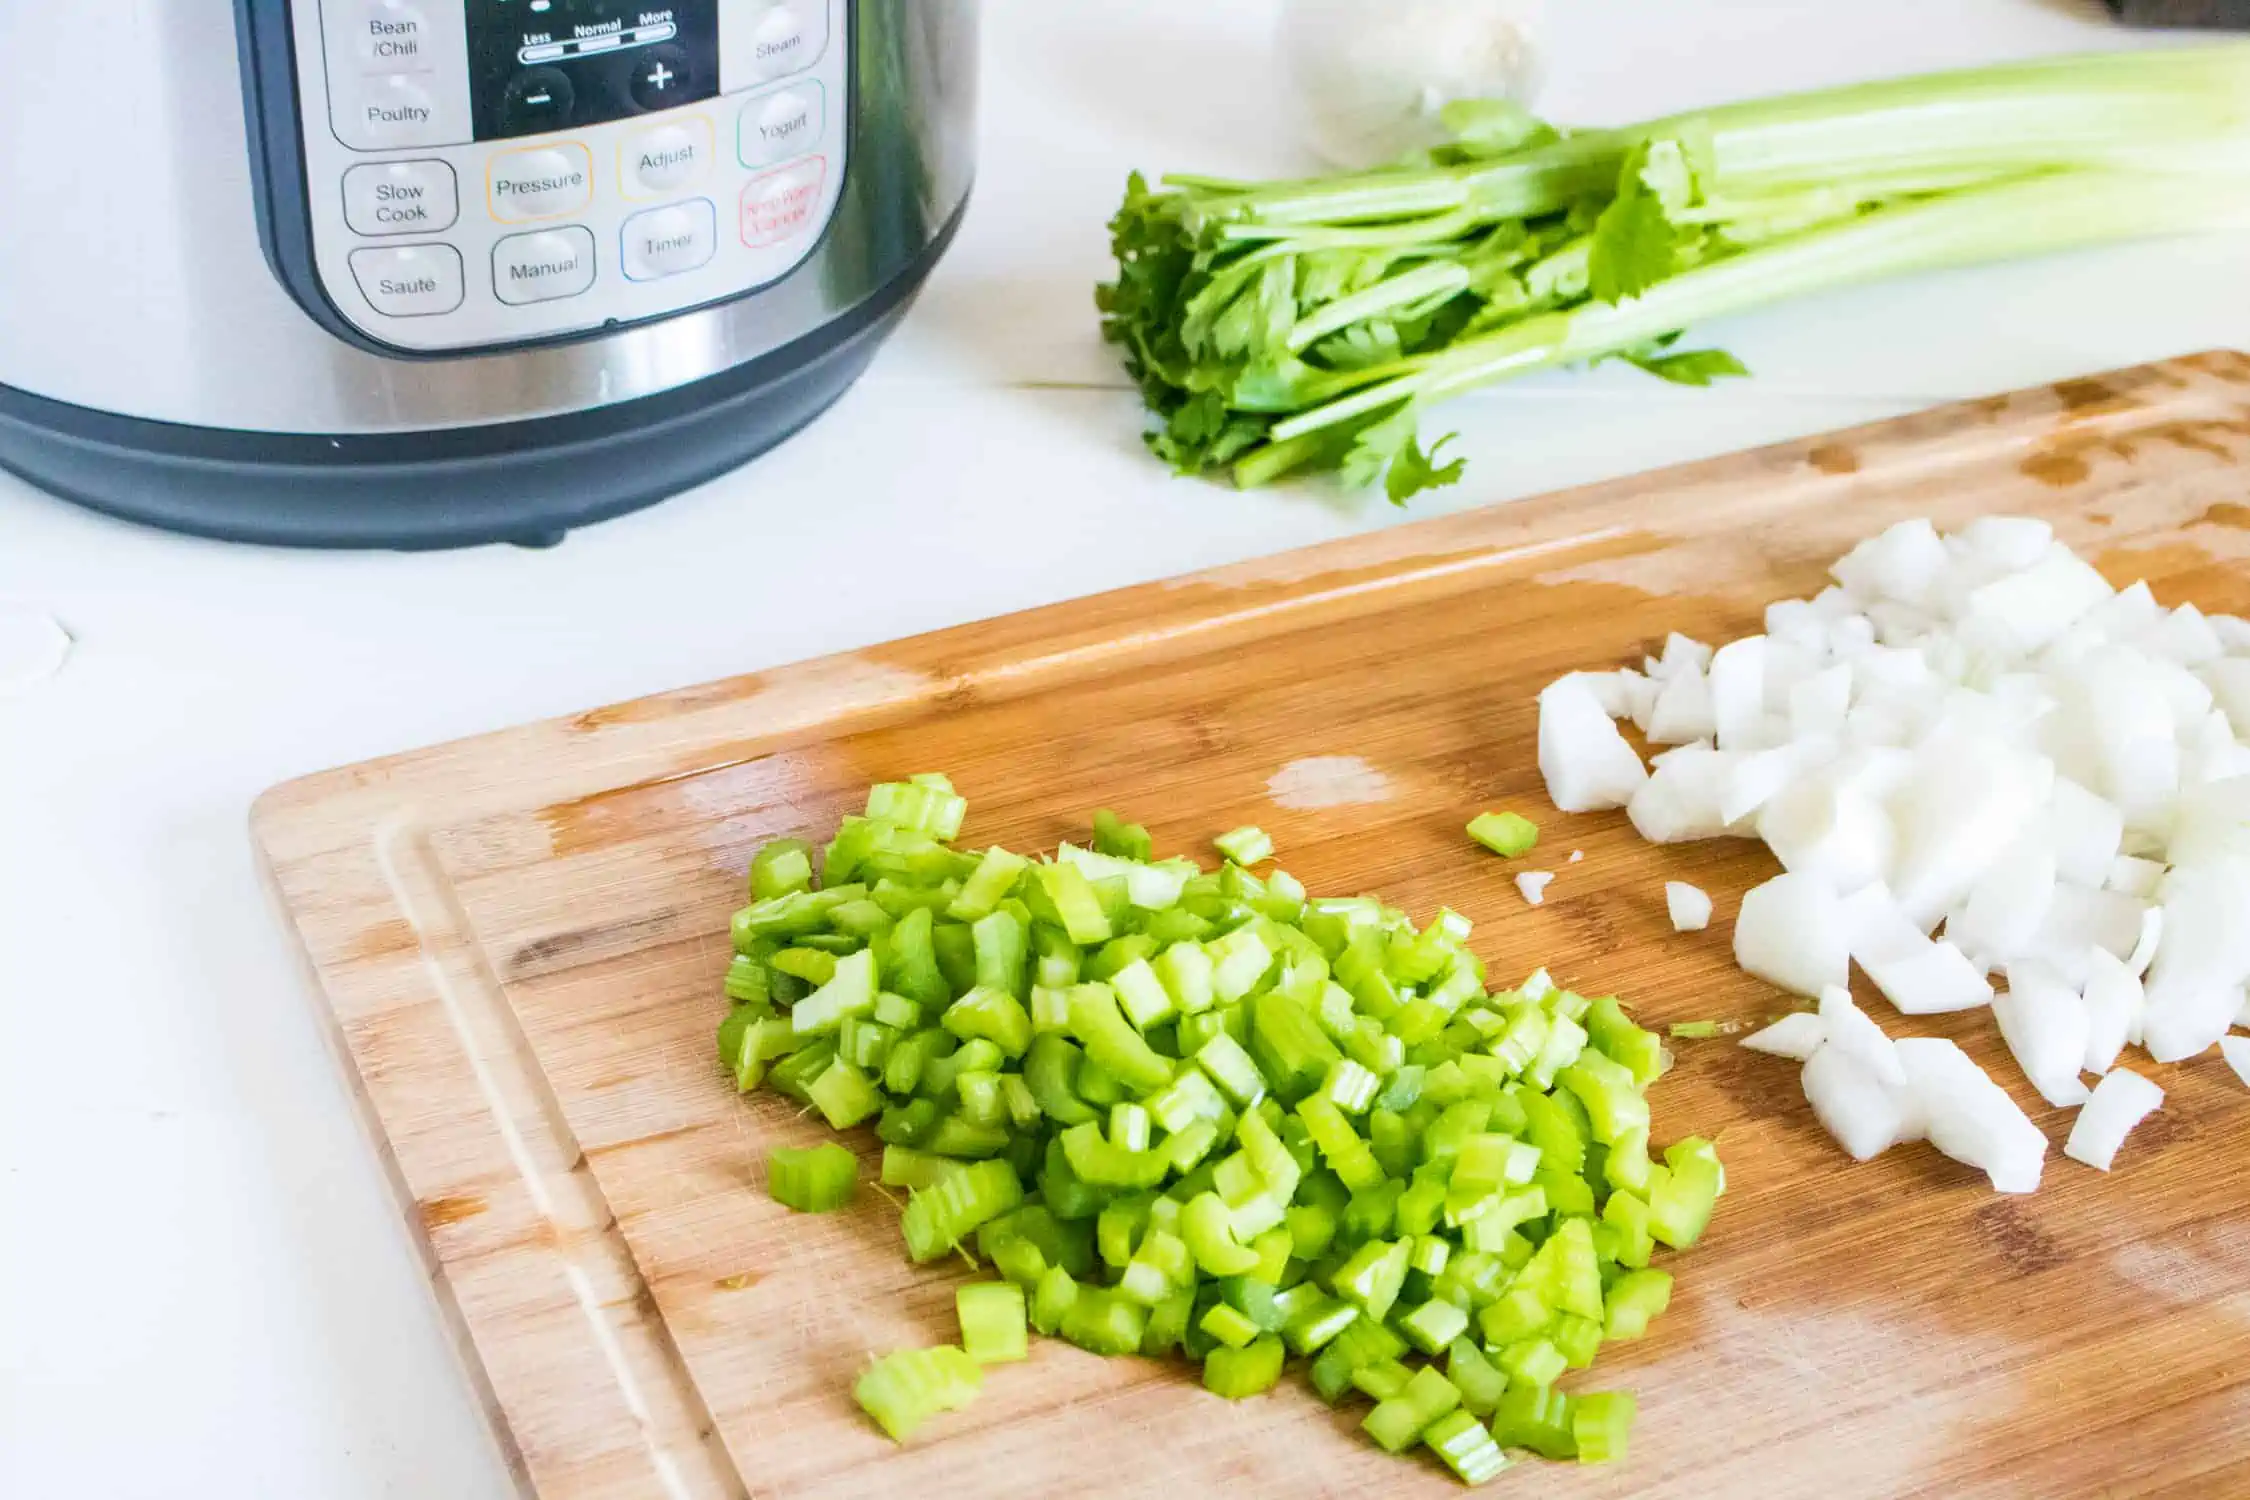 Celery and onions chopped up.